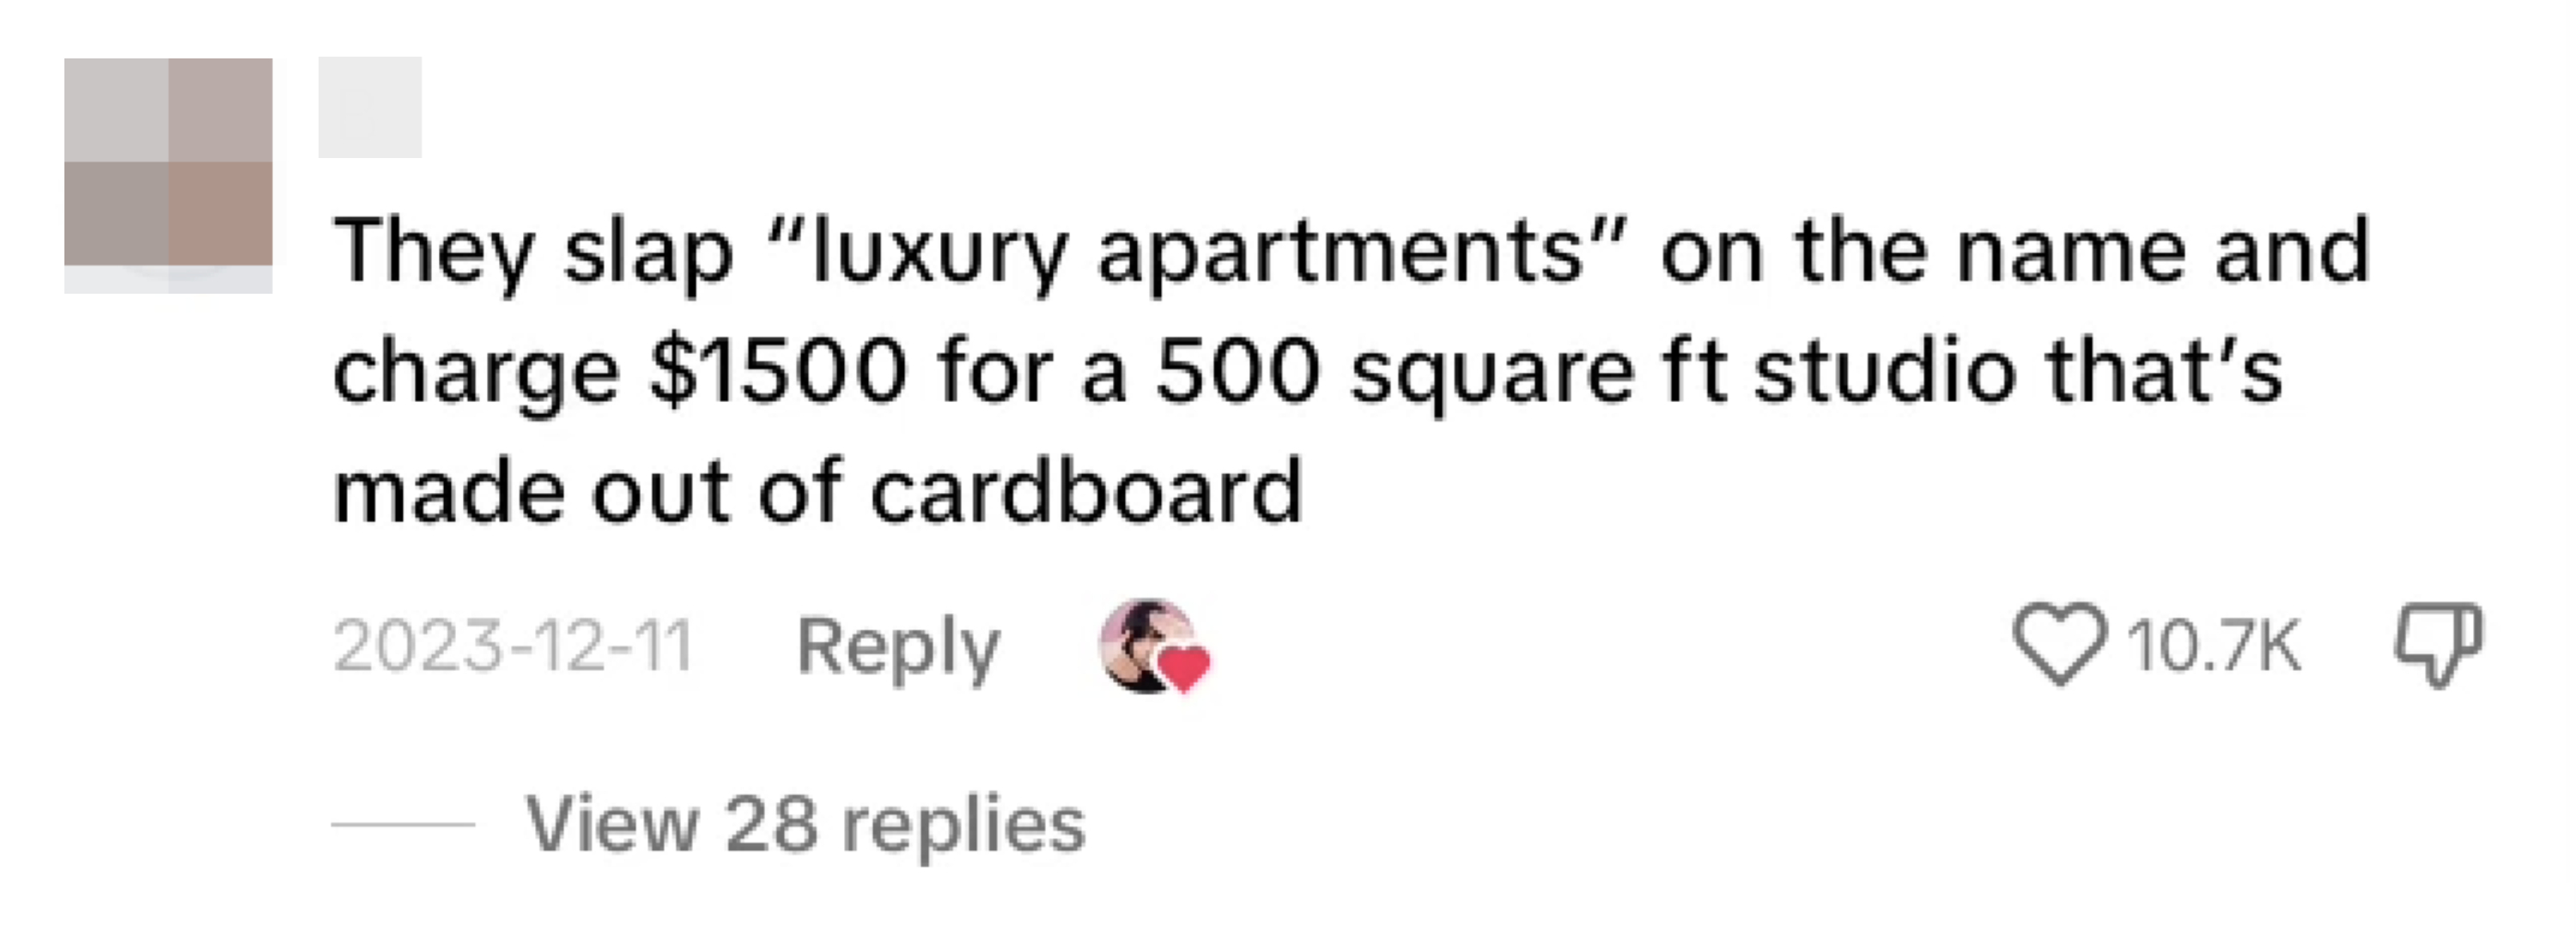 Comment saying, &quot;They slap &#x27;luxury apartments&#x27; on the name and charge $1500 for a 500 square ft studio that&#x27;s made out of cardboard&quot;